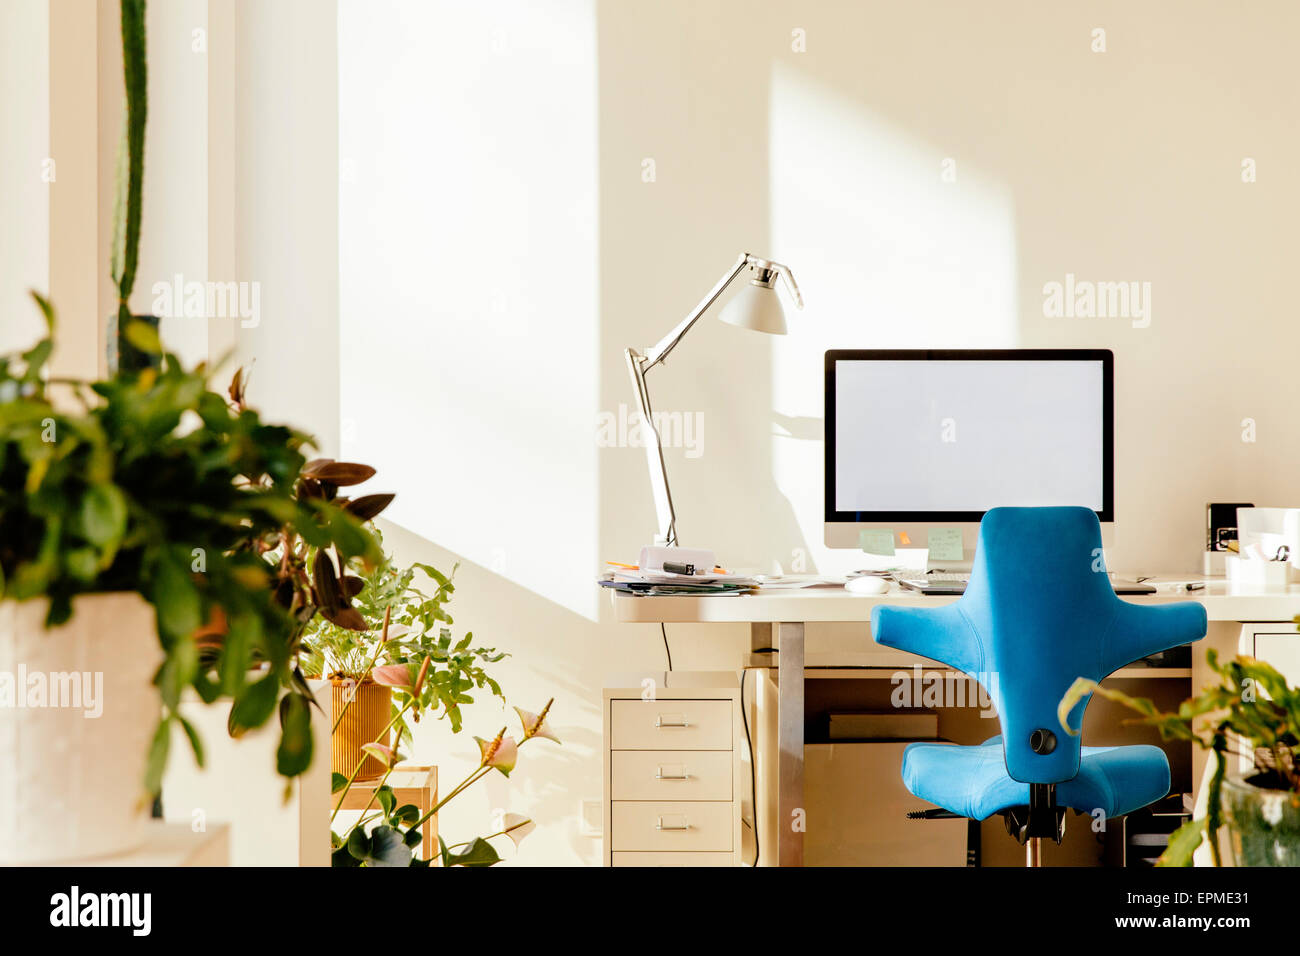 Home office in an apartment Stock Photo